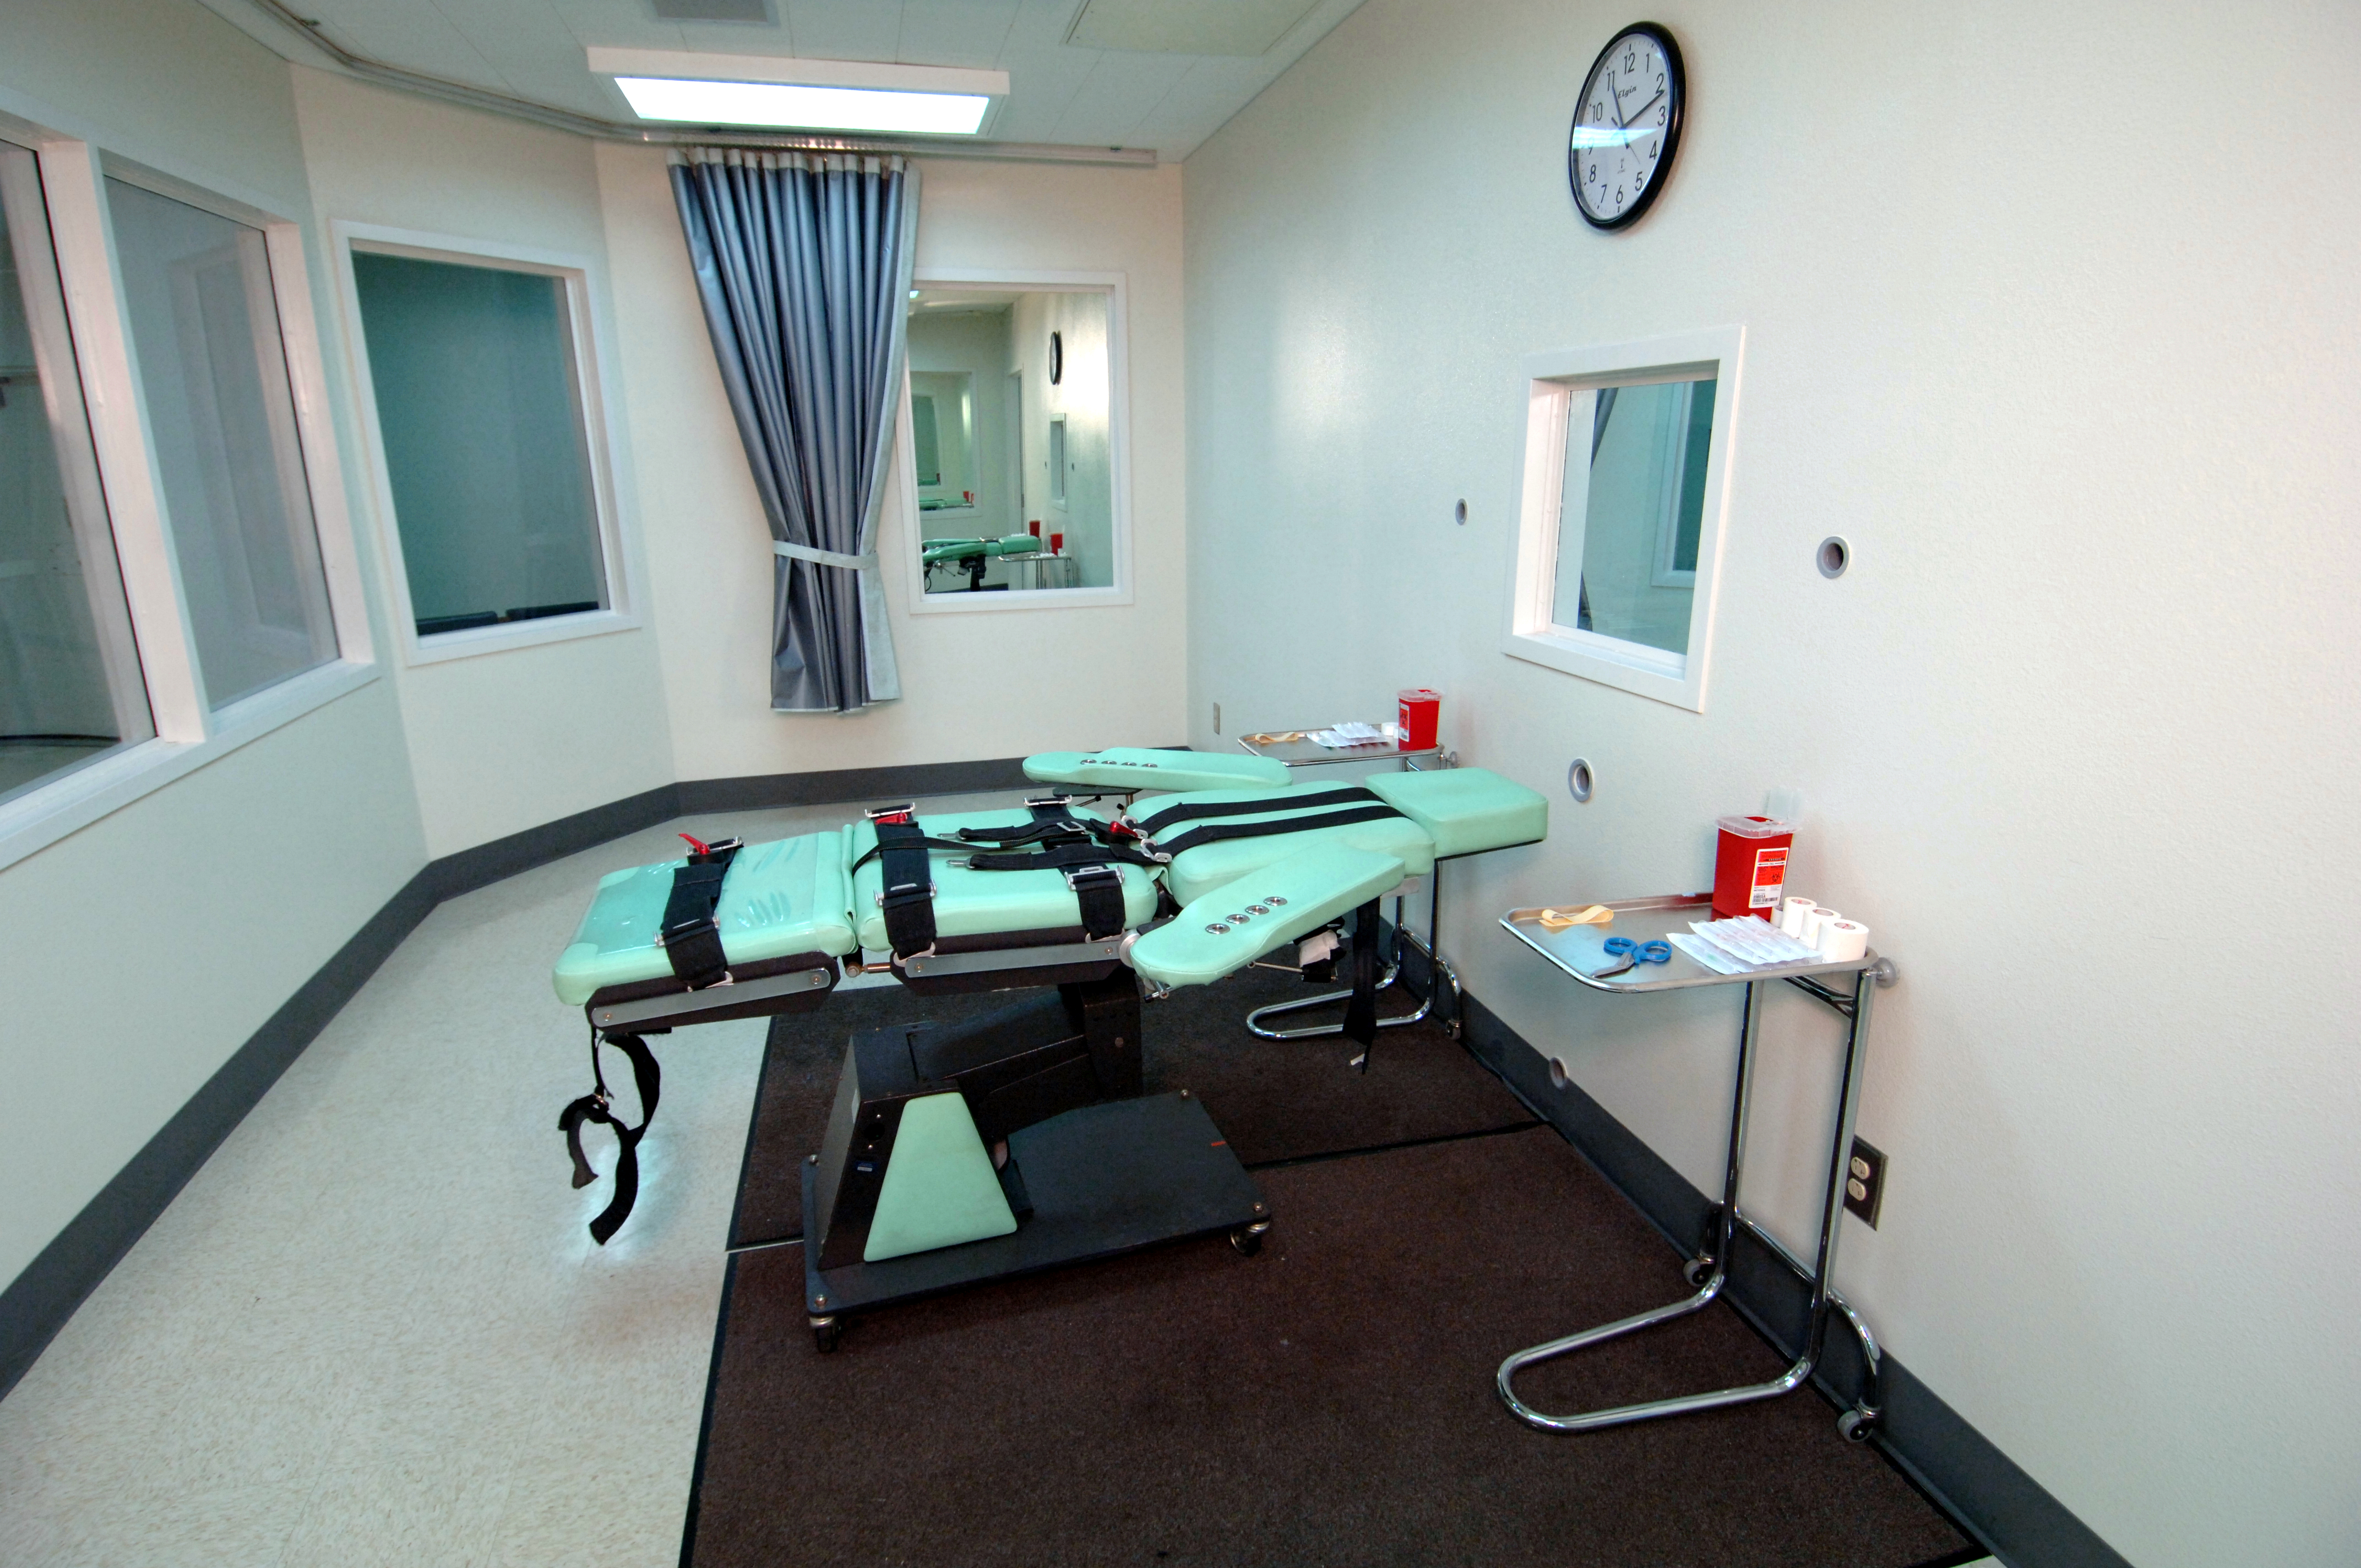 Oklahoma AG requests more time between upcoming executions